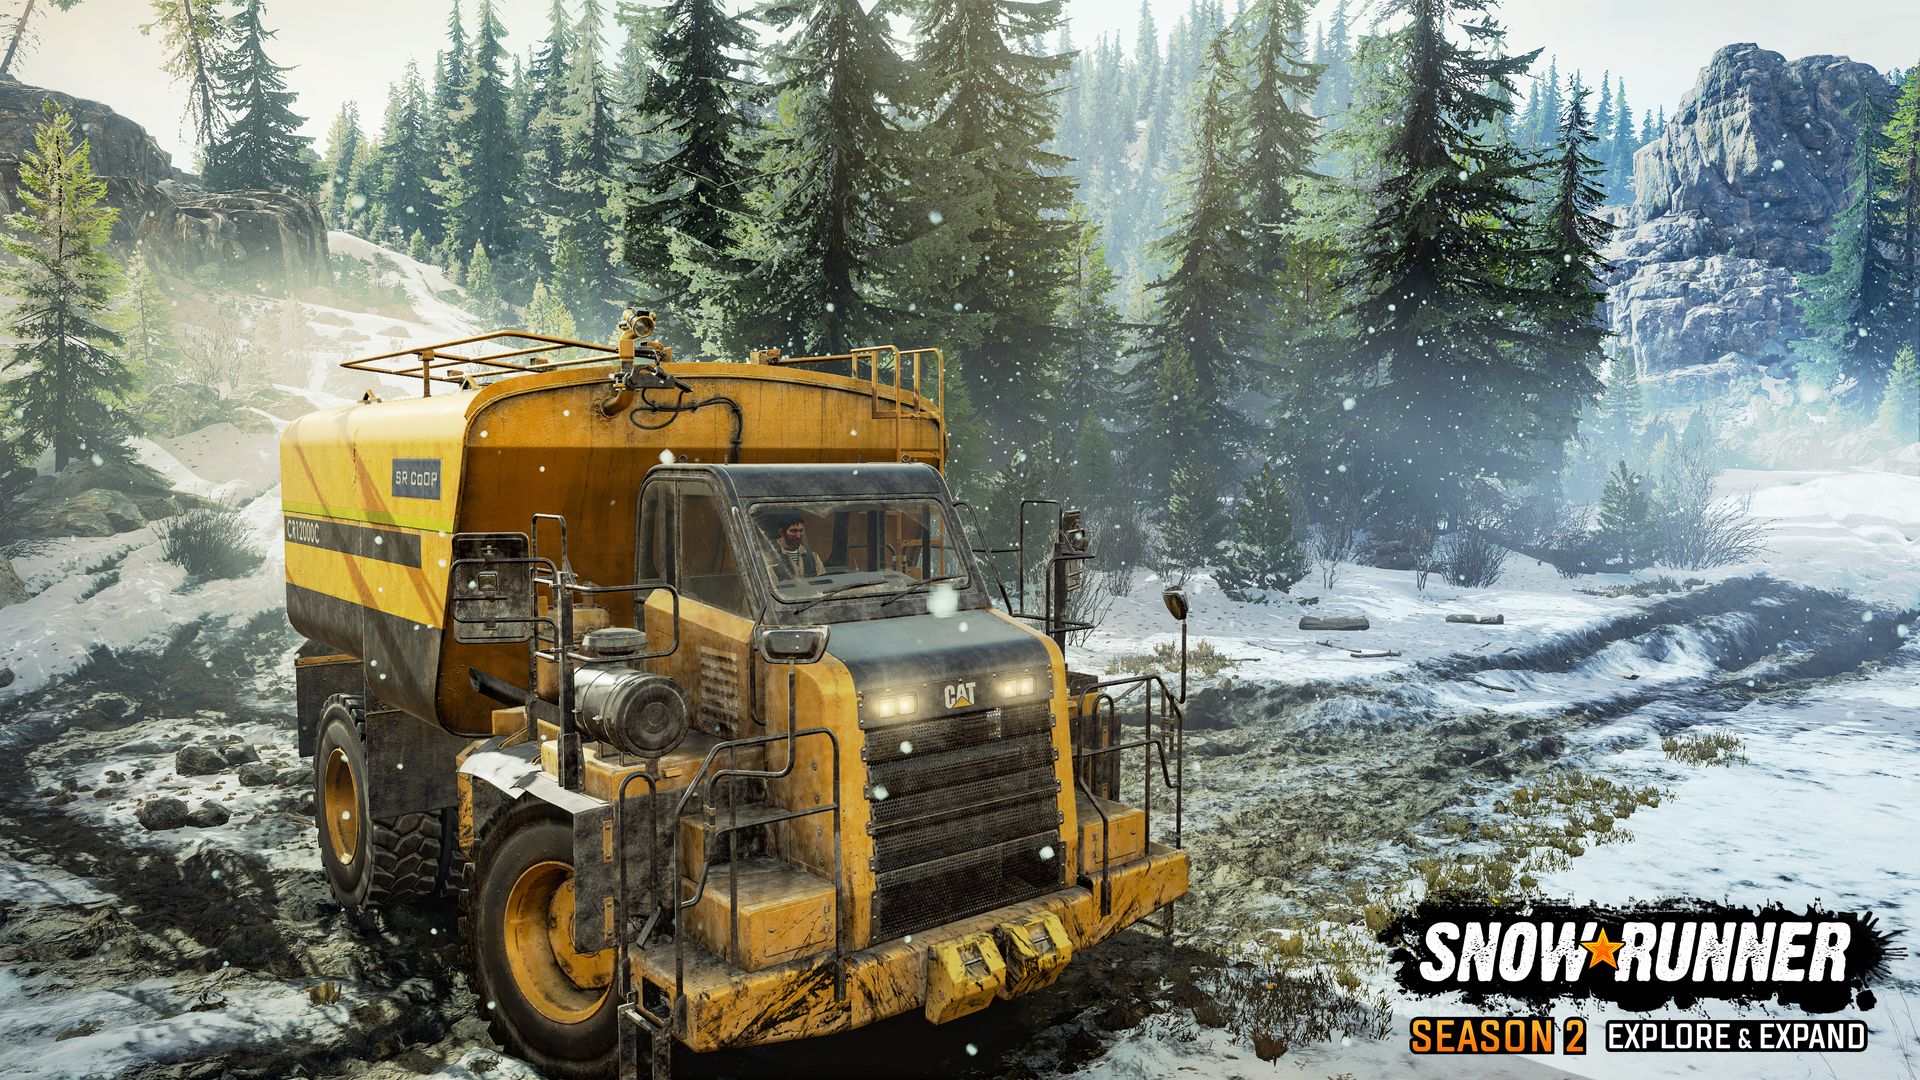 Head To Canada In Snowrunner Season 2 Explore Expand Dlc On Xbox One Ps4 And Pc Thexboxhub